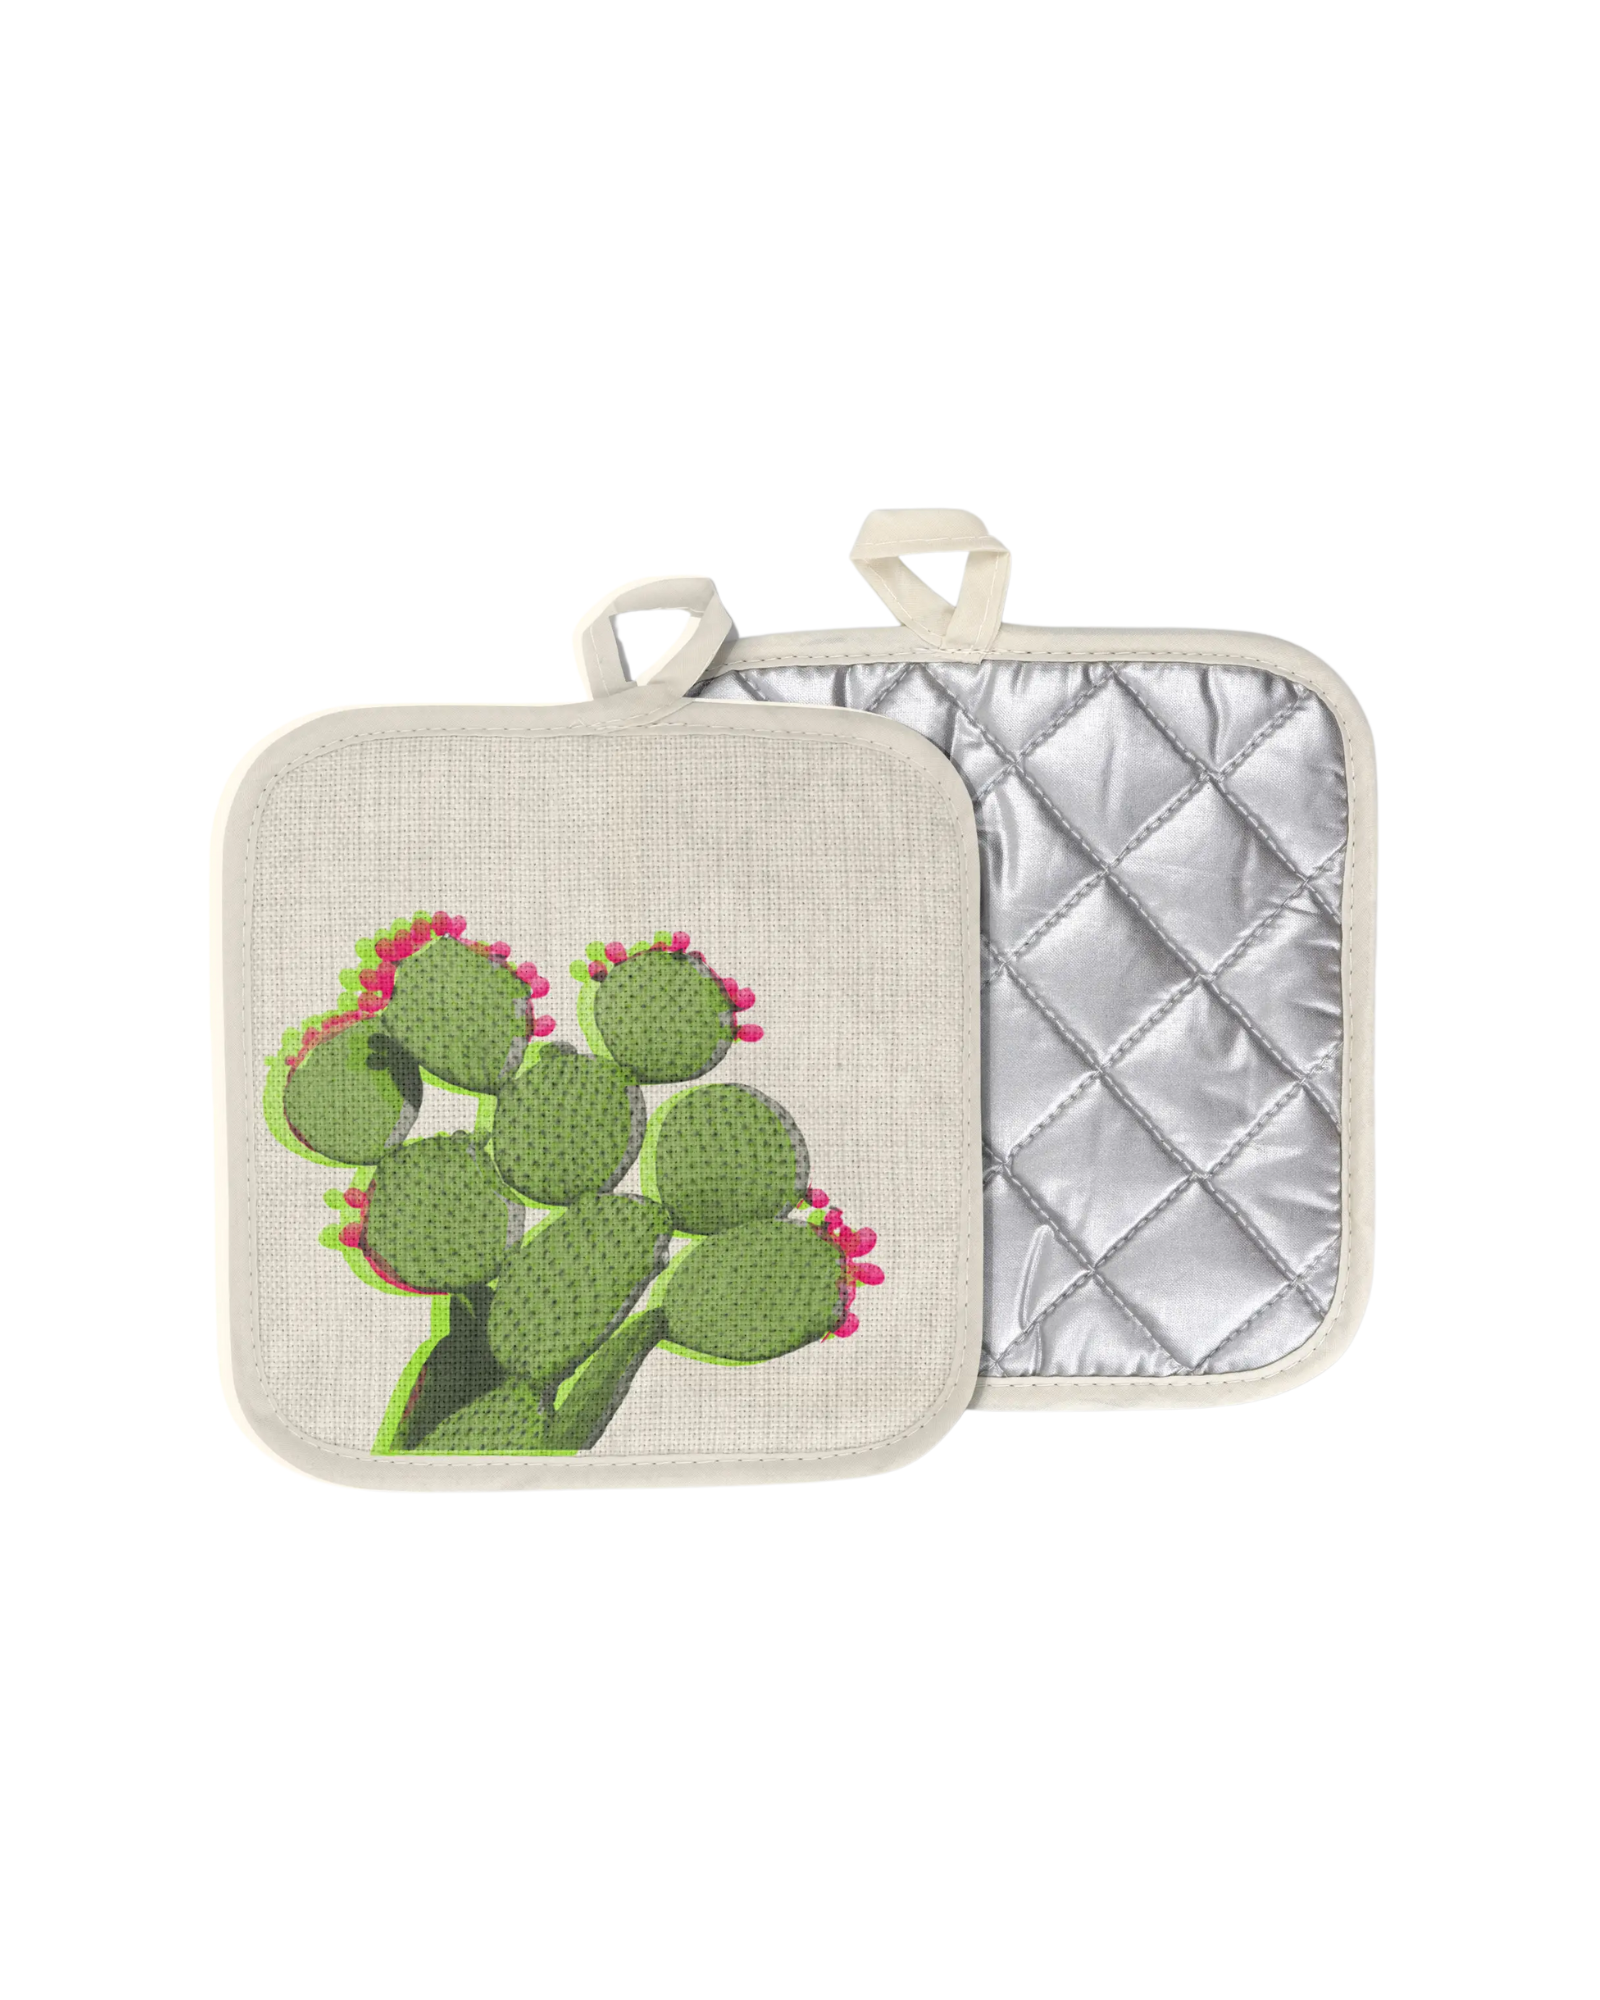 Prickly pear potholder front design of a prickly pear cactus with pink fruit, and back of pot holder with silver reflective material